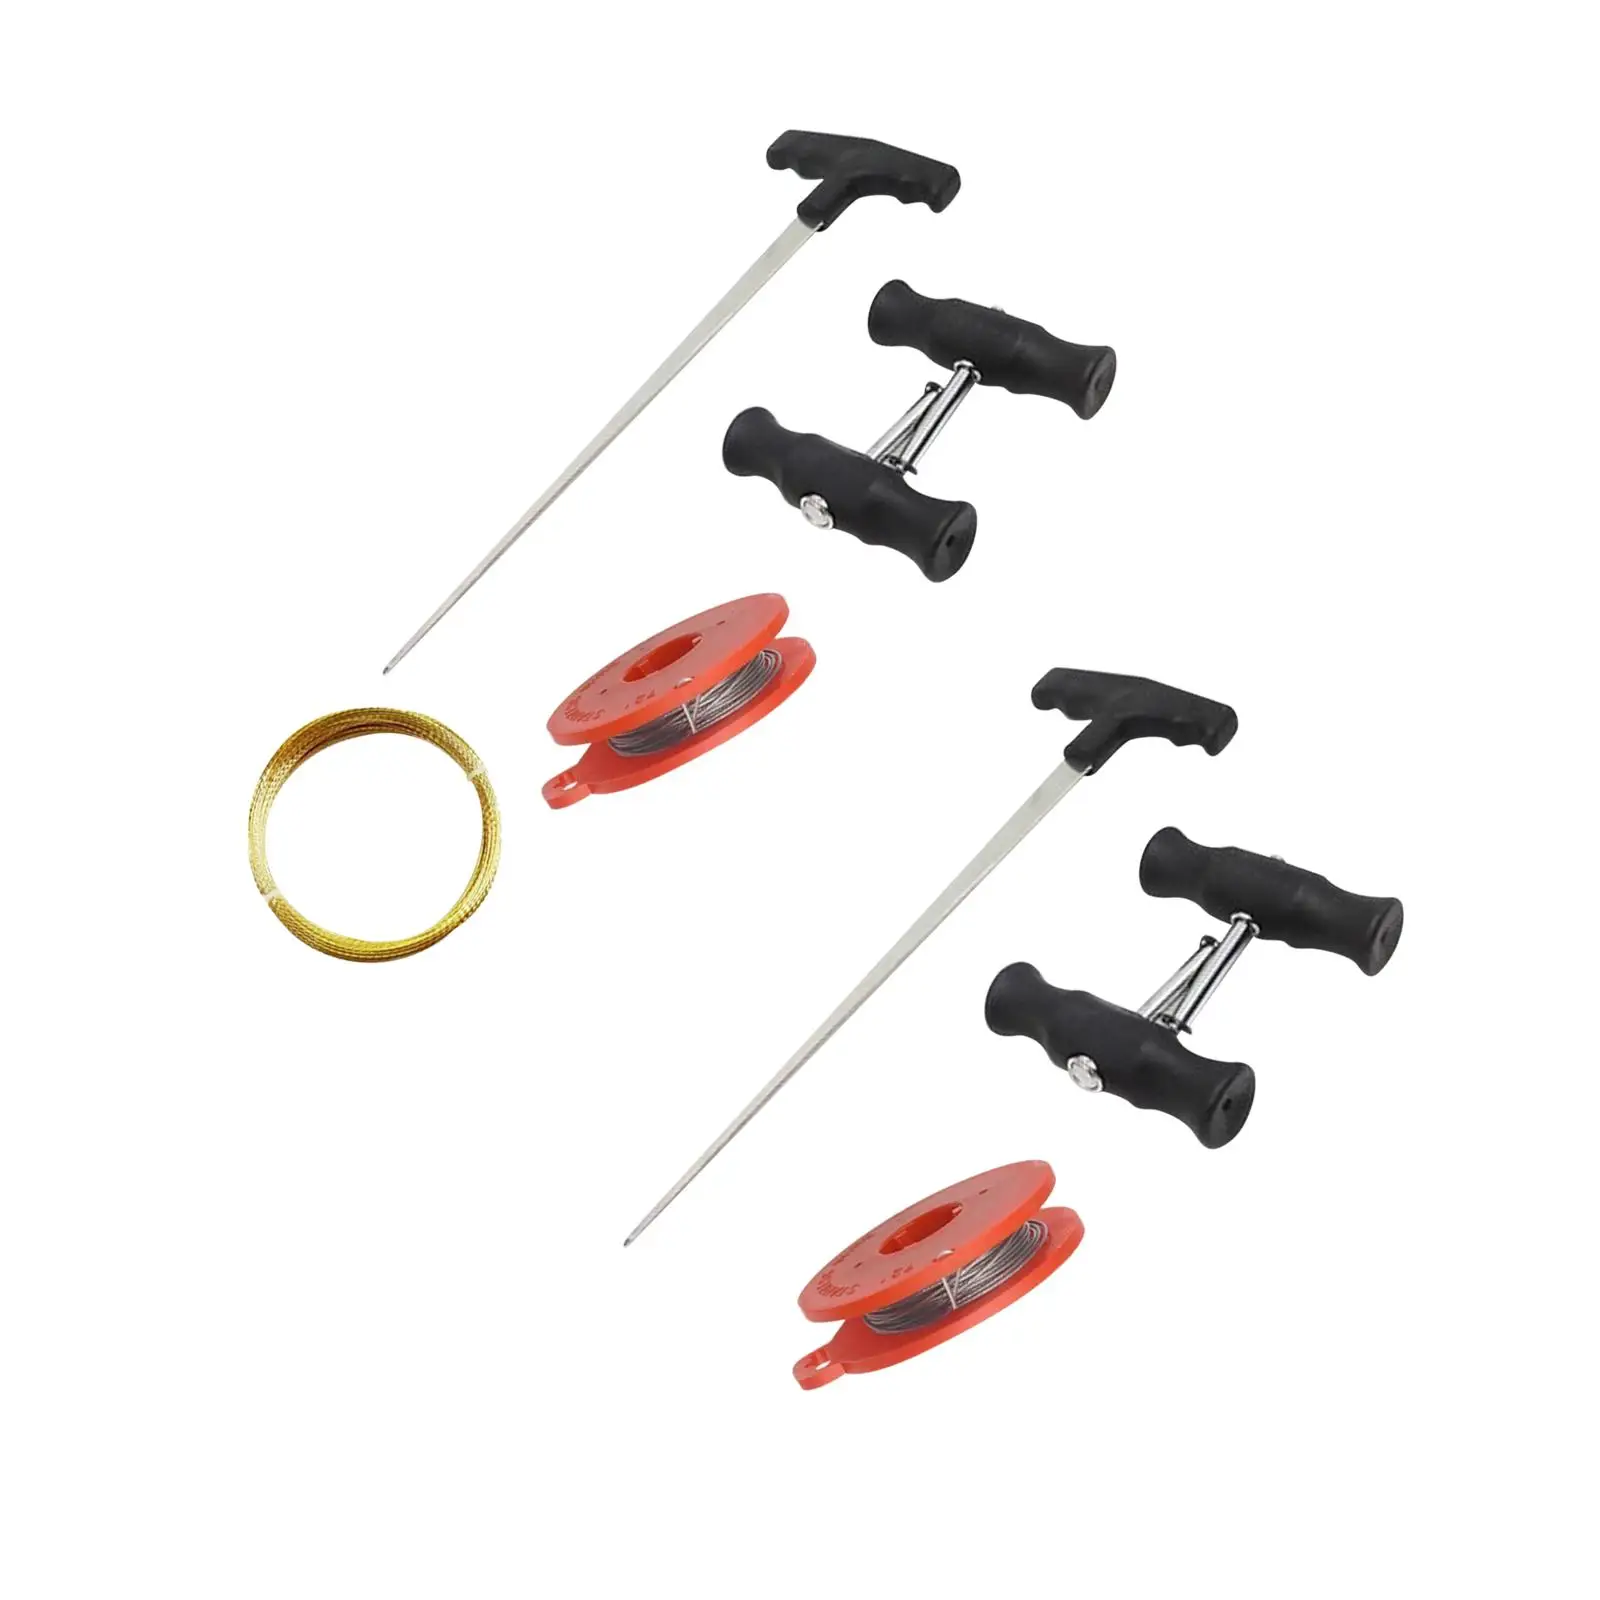 Car Windshield Removal Tools Set Compact with Steel Wire Quality Comfortable Grip Automotive Wind Glass Remover Universal